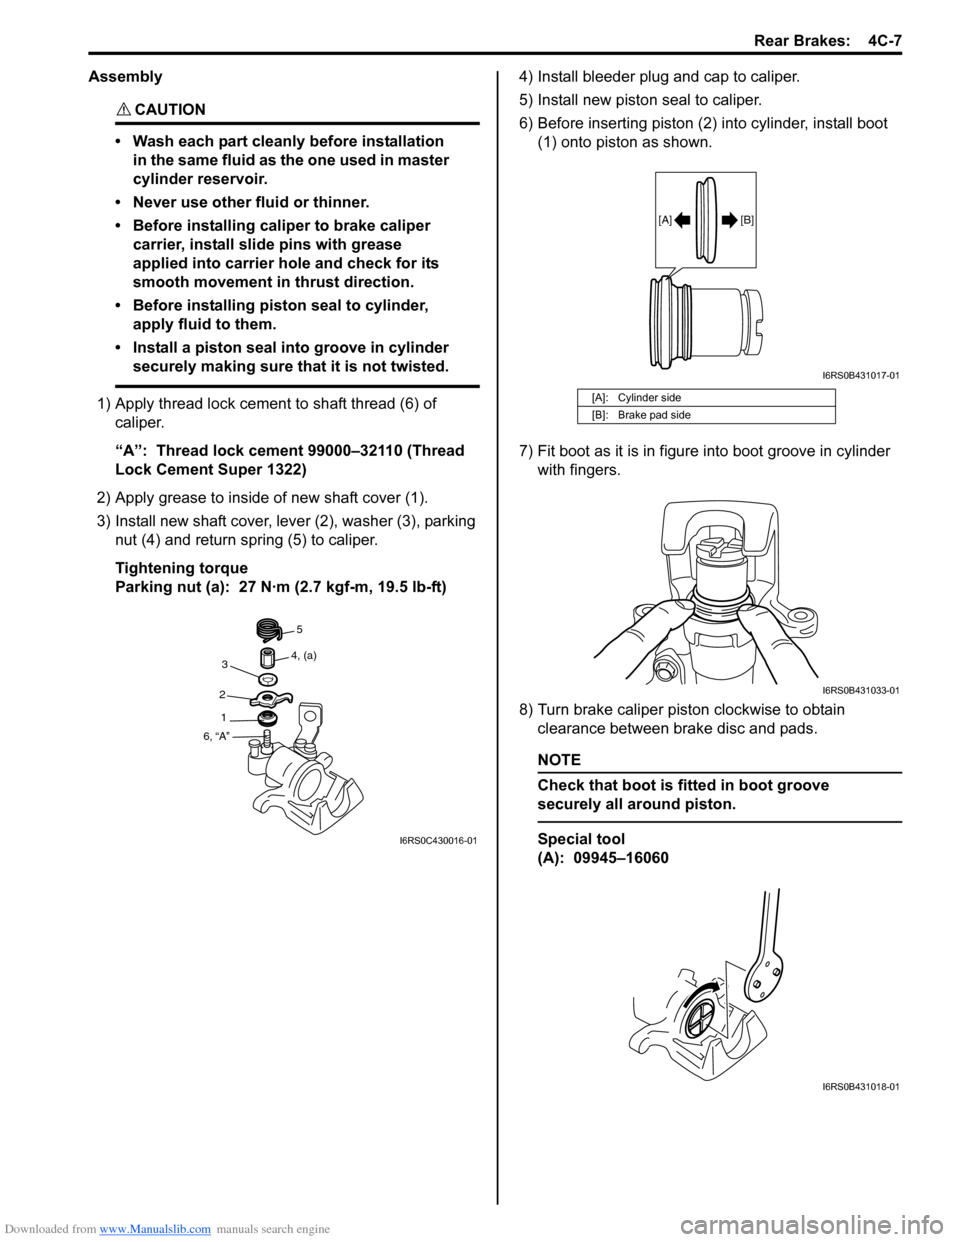 SUZUKI SWIFT 2007 2.G Service Workshop Manual Downloaded from www.Manualslib.com manuals search engine Rear Brakes:  4C-7
Assembly
CAUTION! 
• Wash each part cleanly before installation in the same fluid as the one used in master 
cylinder rese